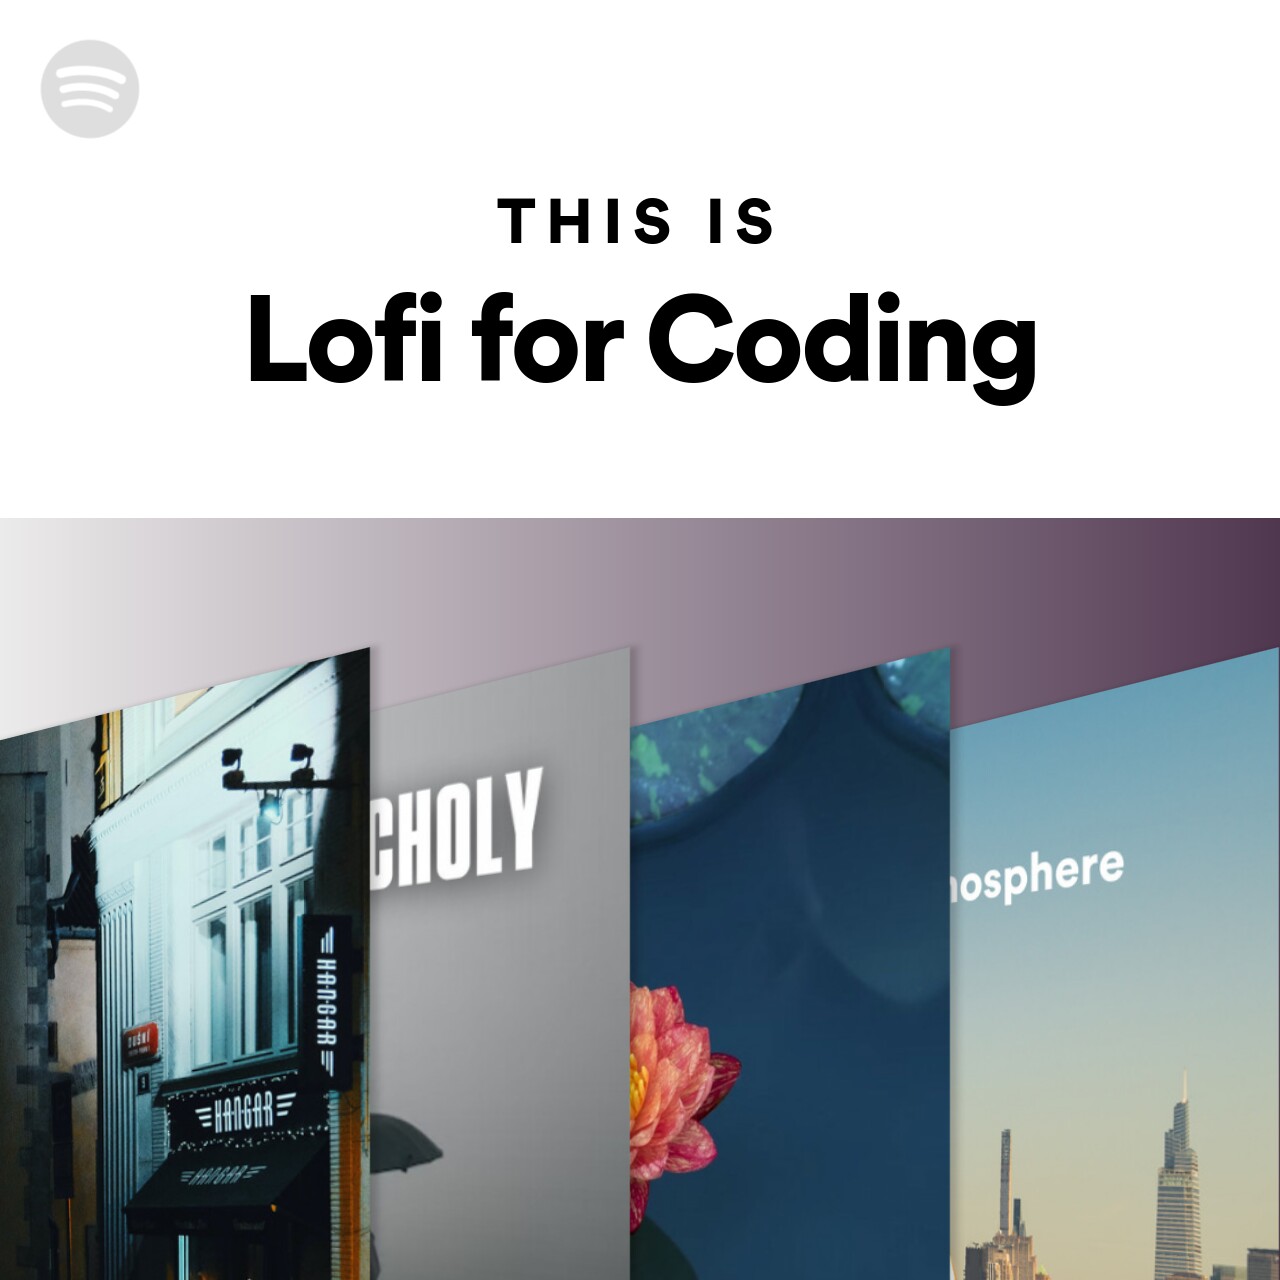 This Is Lofi for Coding